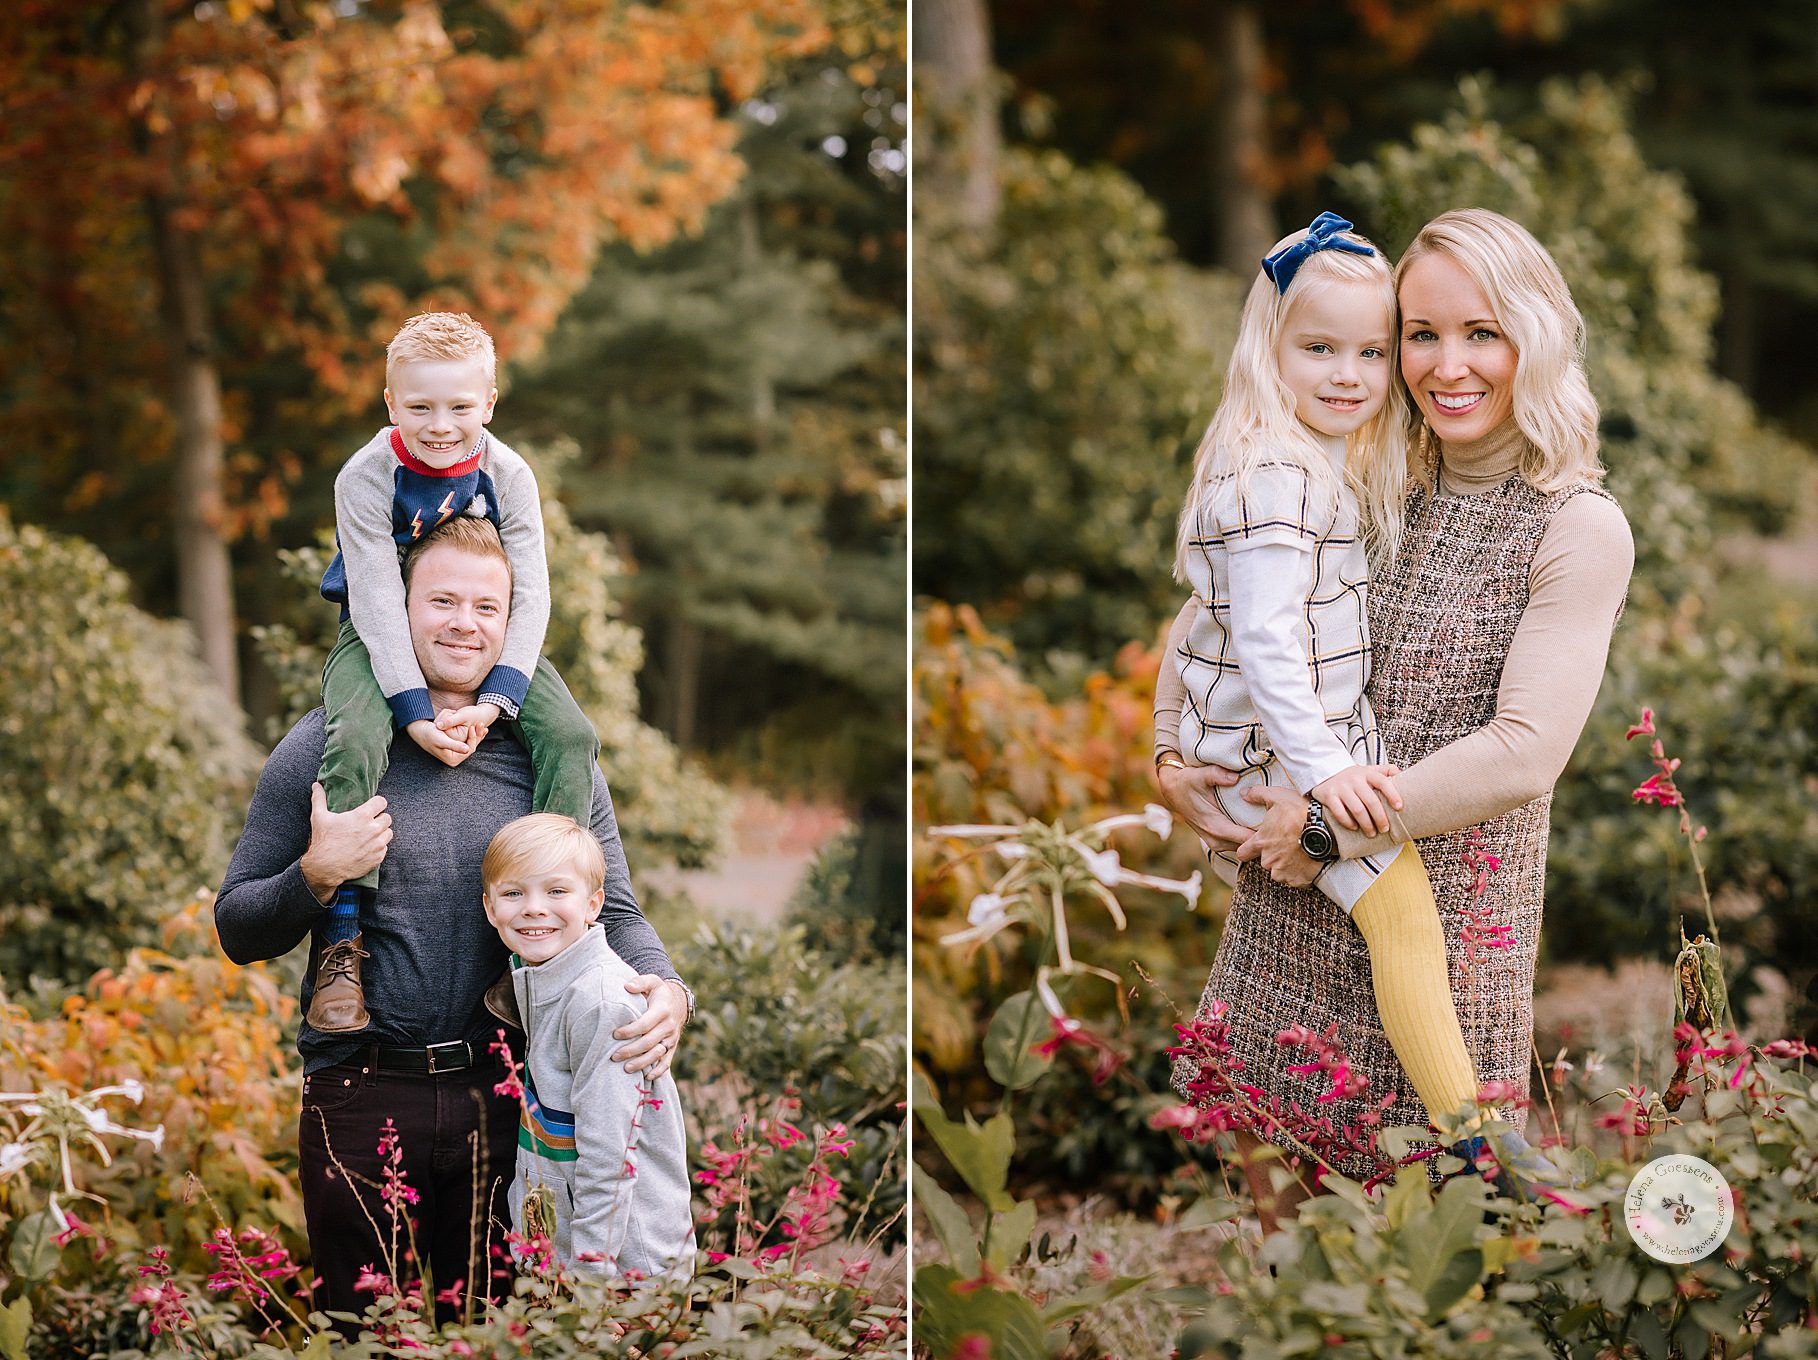 Helena Goessens Photography photographs MA family in the gardens 